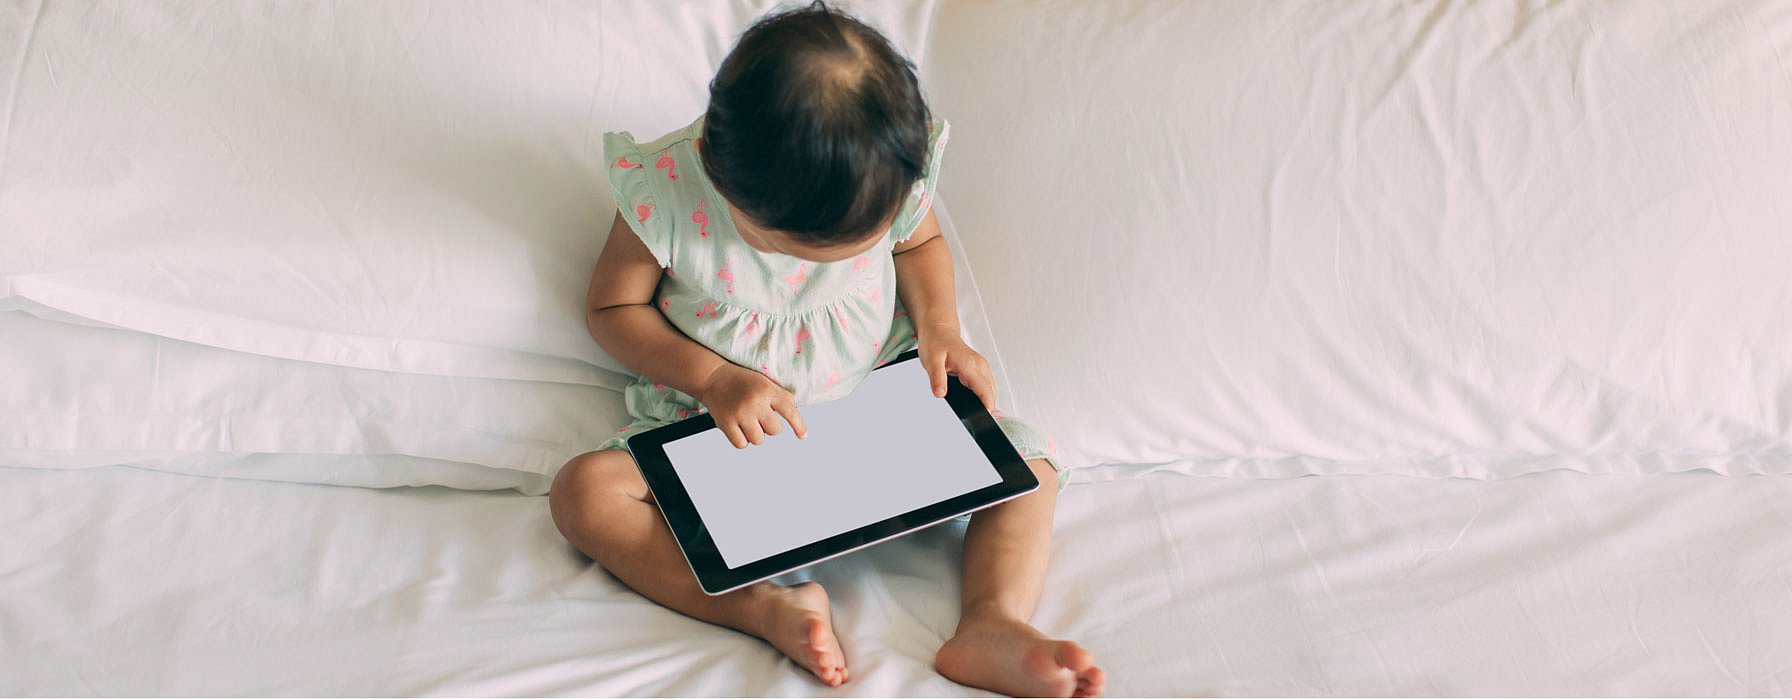 hd_child-with-tablet.jpg